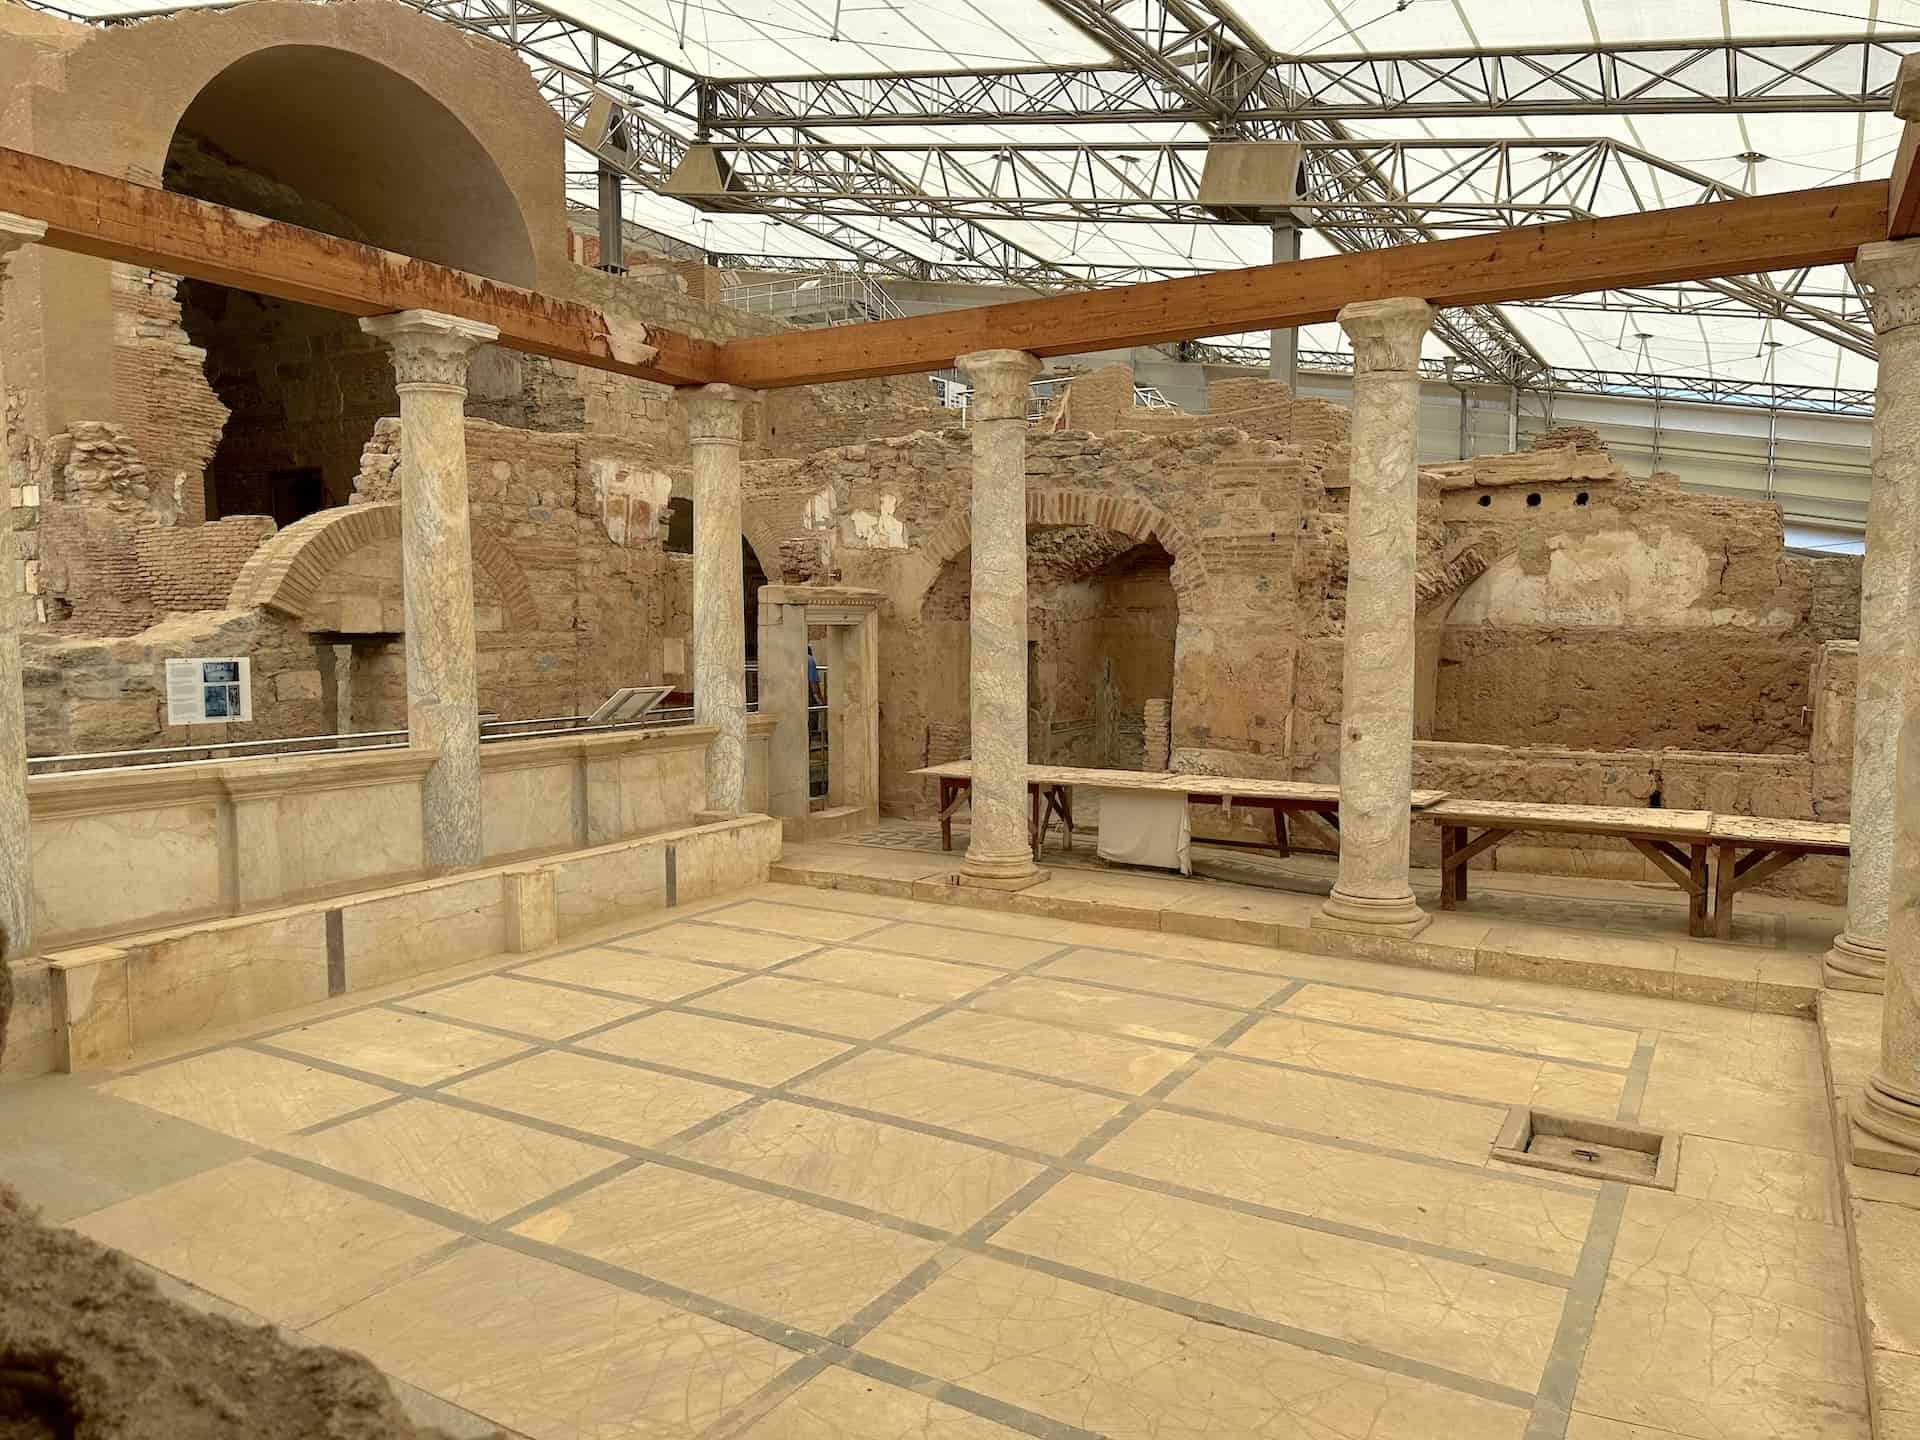 Peristyle courtyard of Dwelling Unit 6 of the Terrace Houses at Ephesus